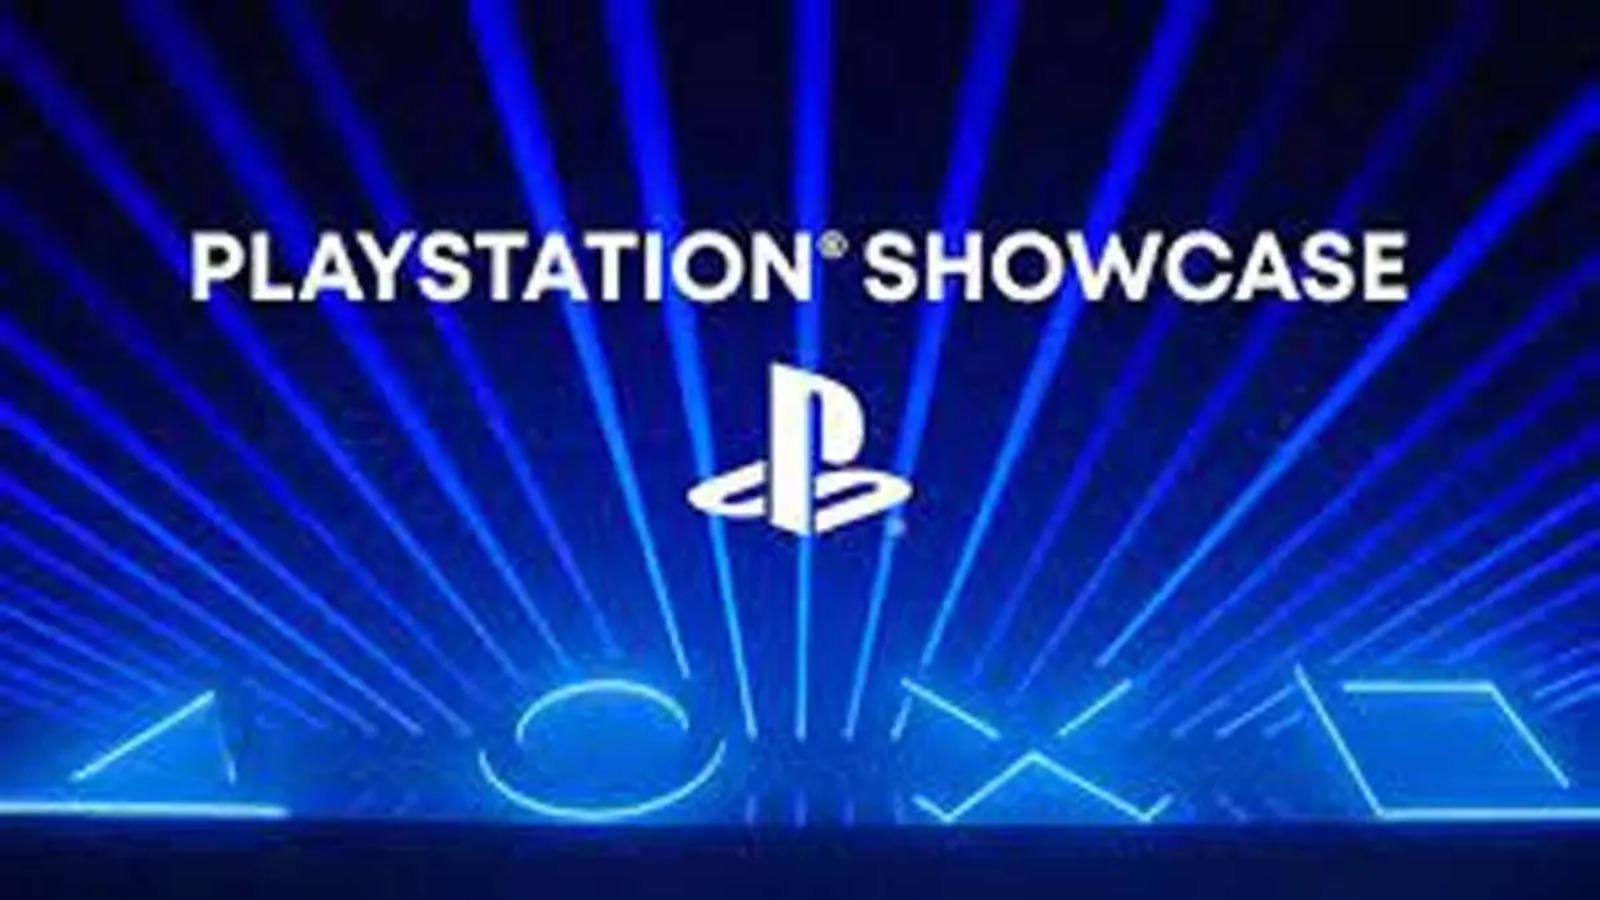 The 7 Best Video Game Announcements at Sony's PlayStation Showcase 2021